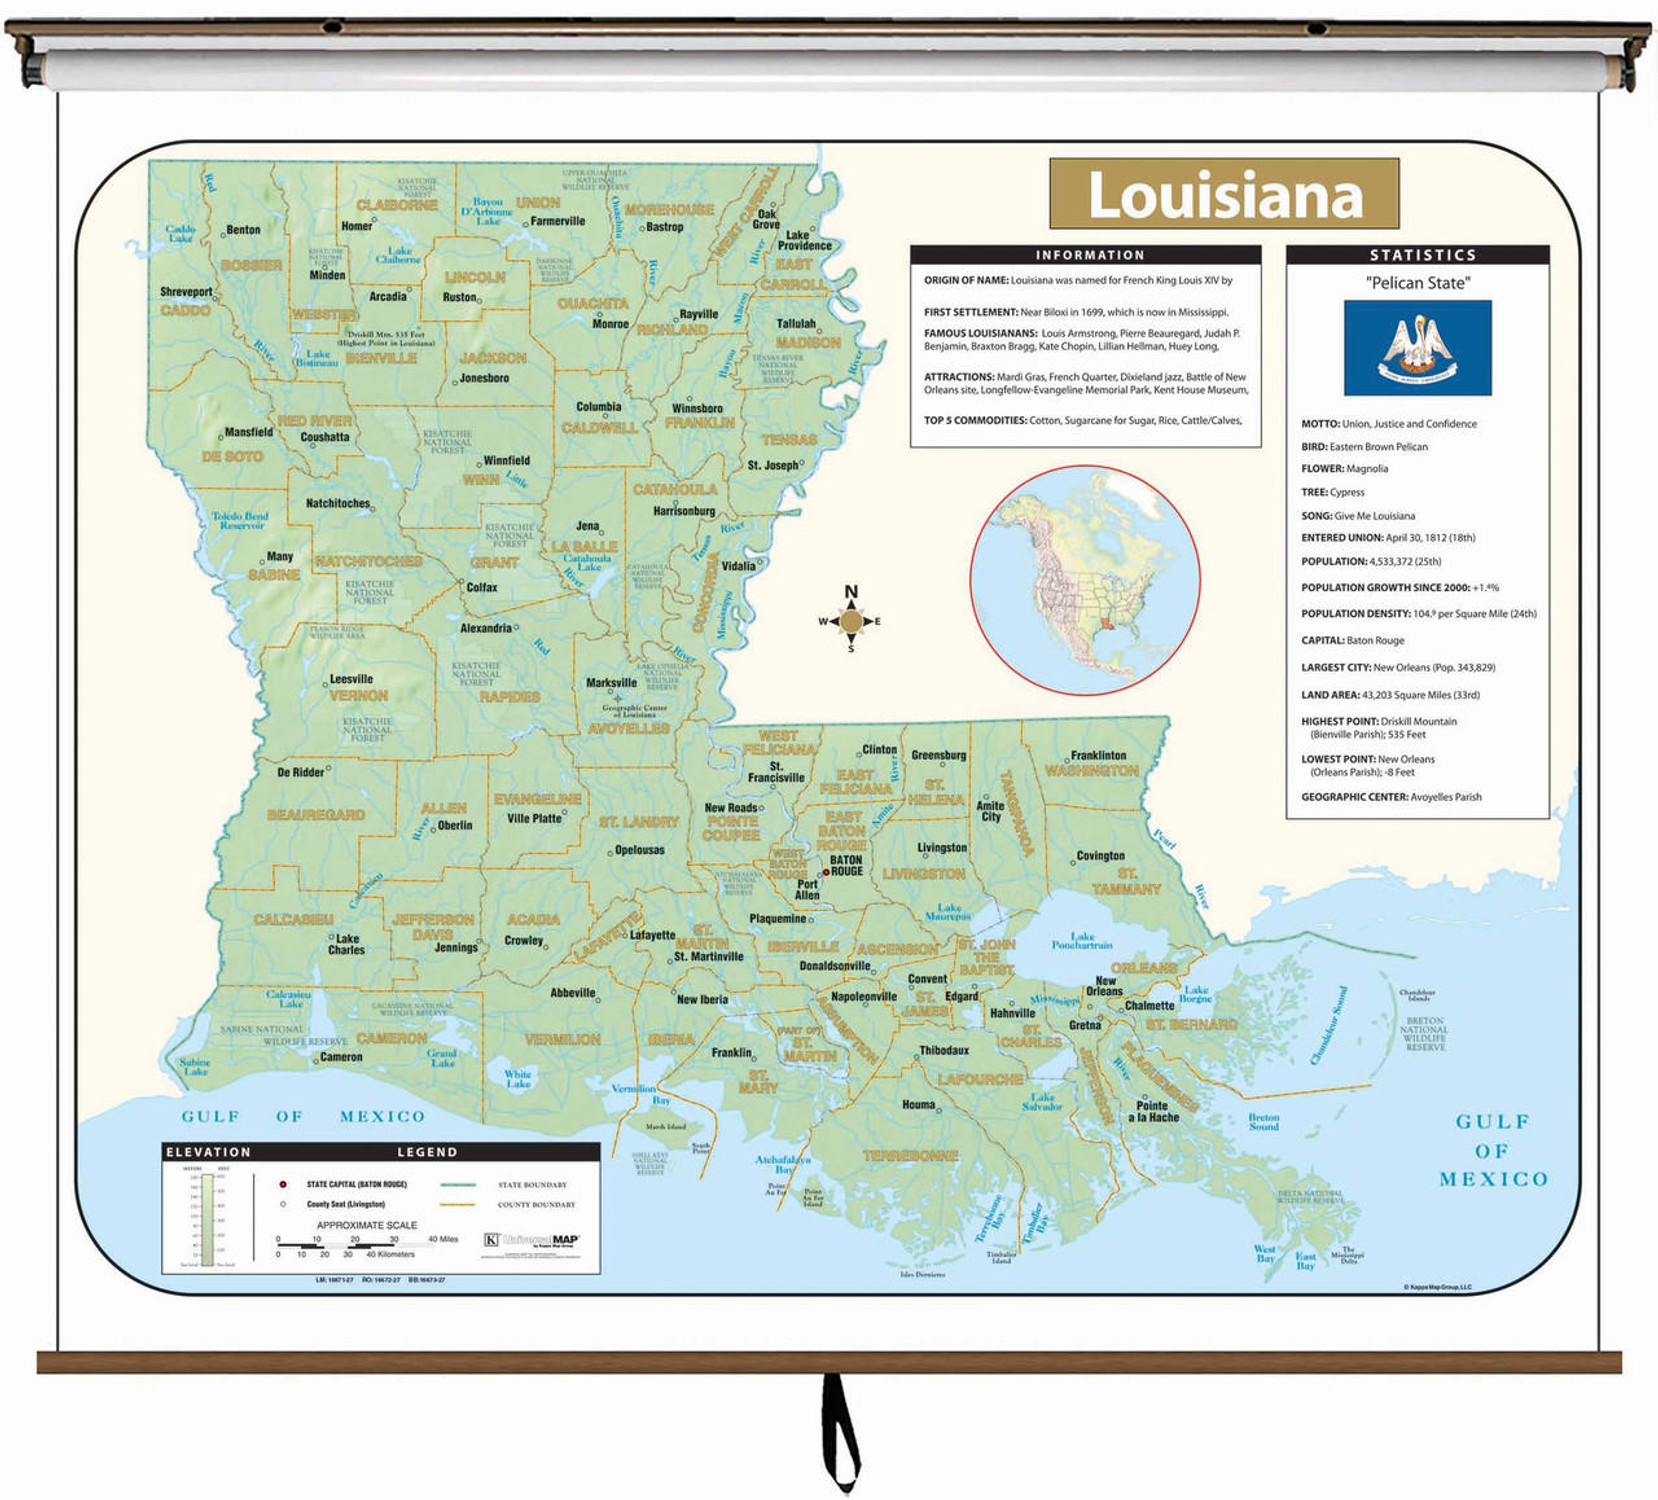 Louisiana Large Shaded Relief Map on Spring Roller from Kappa Maps, image 1, World Maps Online